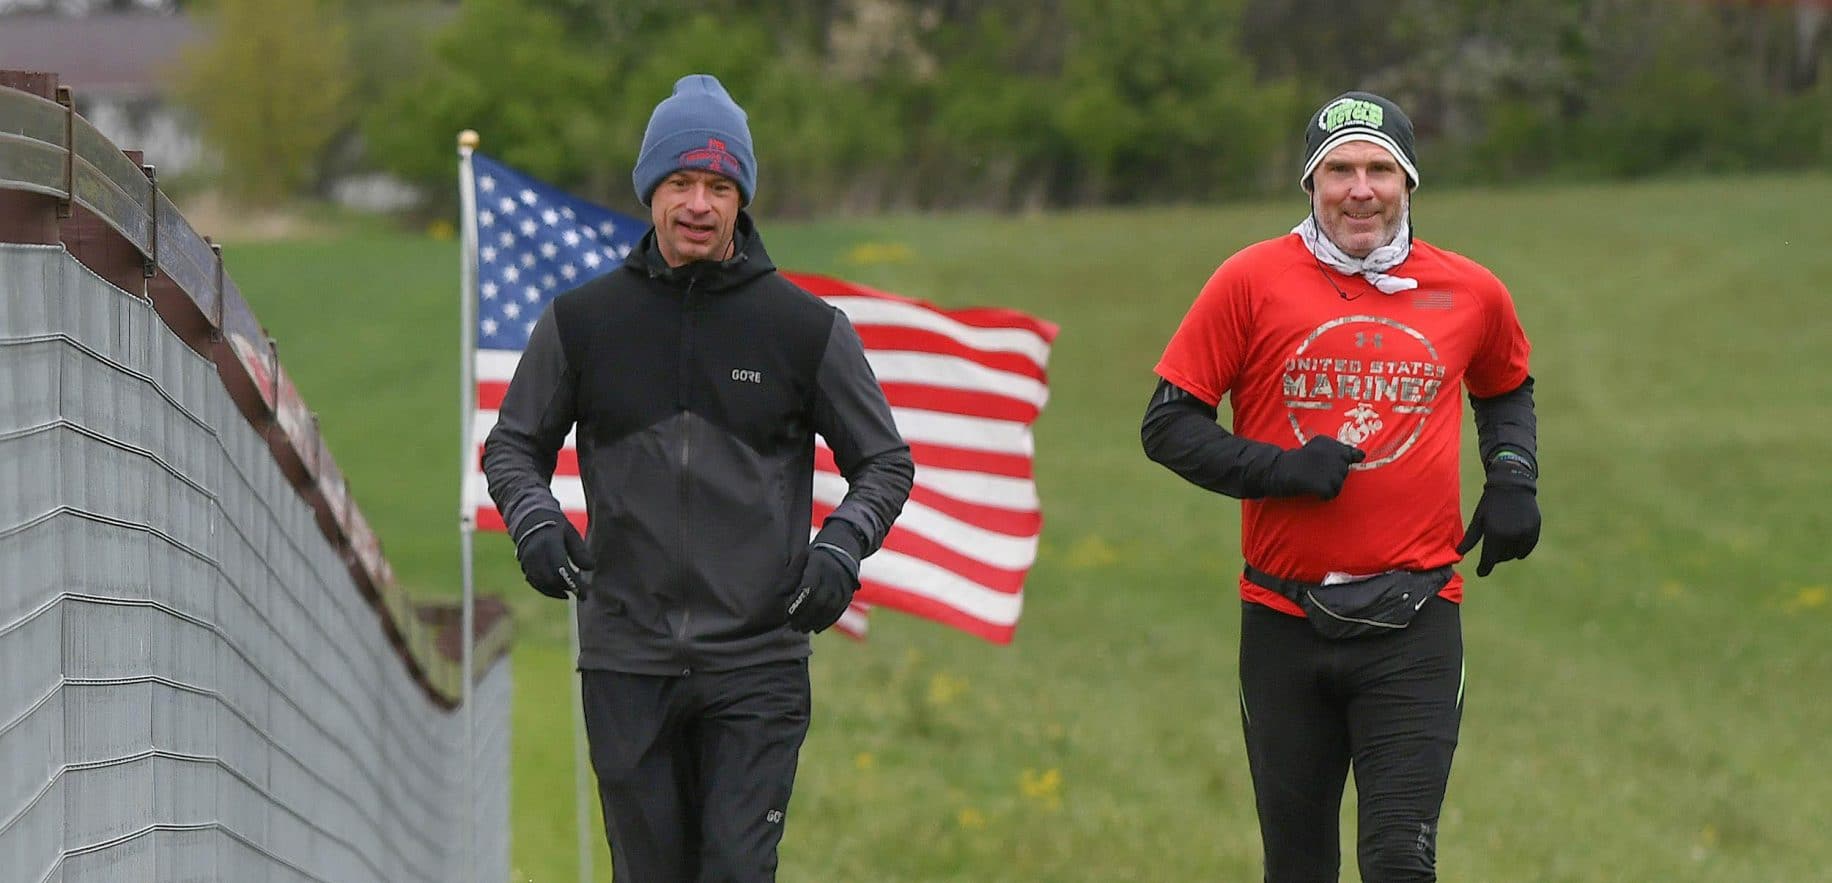 Veterans run 24 hours to raise funds for nonprofit group American